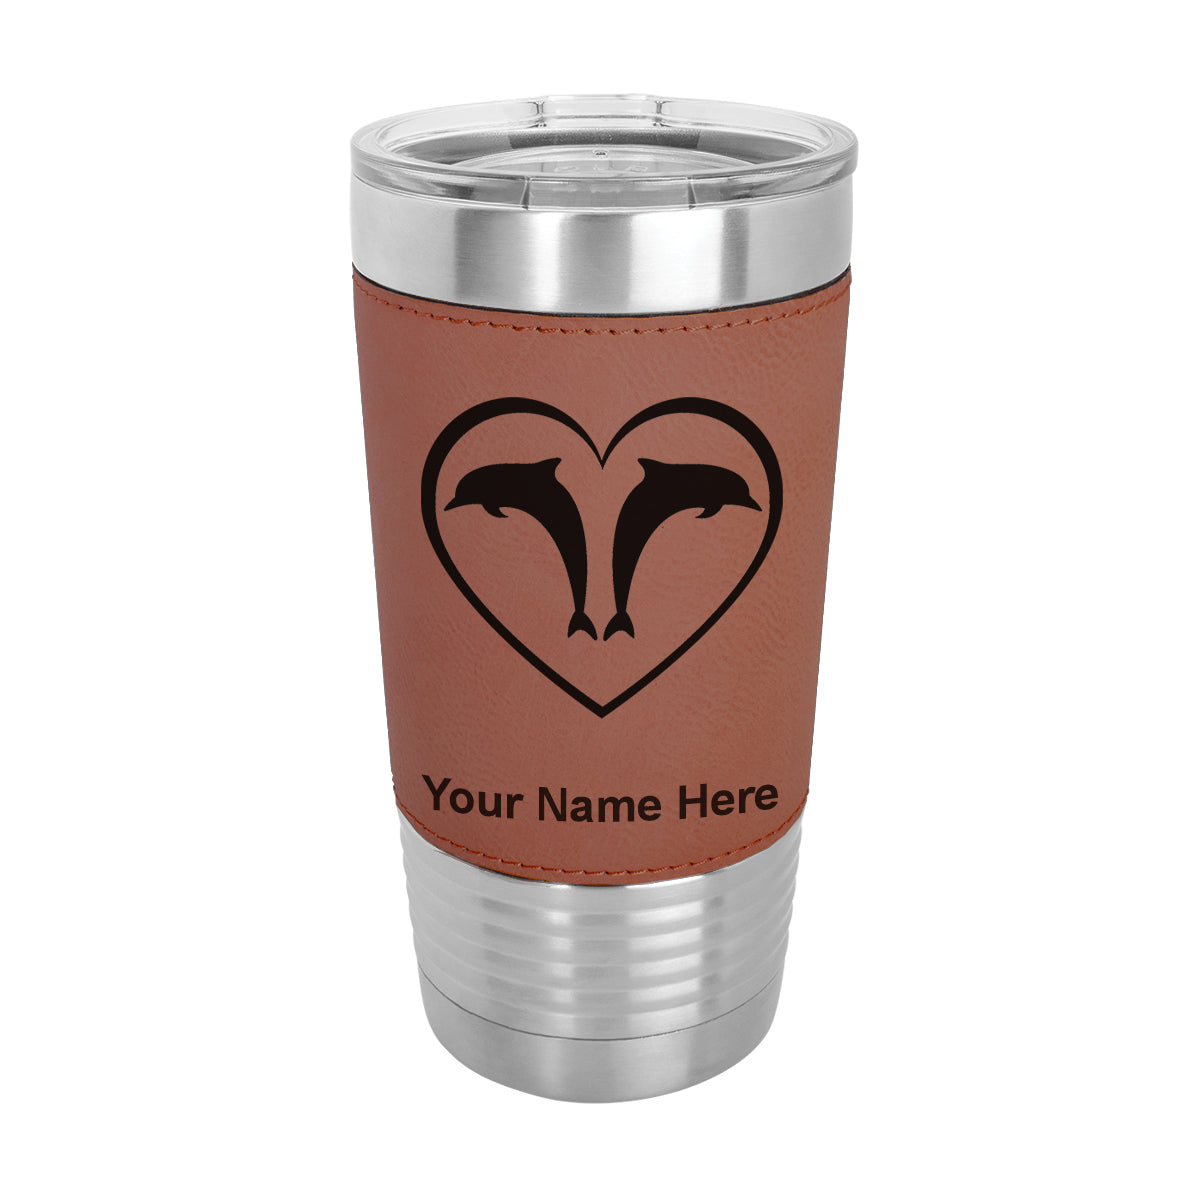 20oz Faux Leather Tumbler Mug, Dolphin Heart, Personalized Engraving Included - LaserGram Custom Engraved Gifts